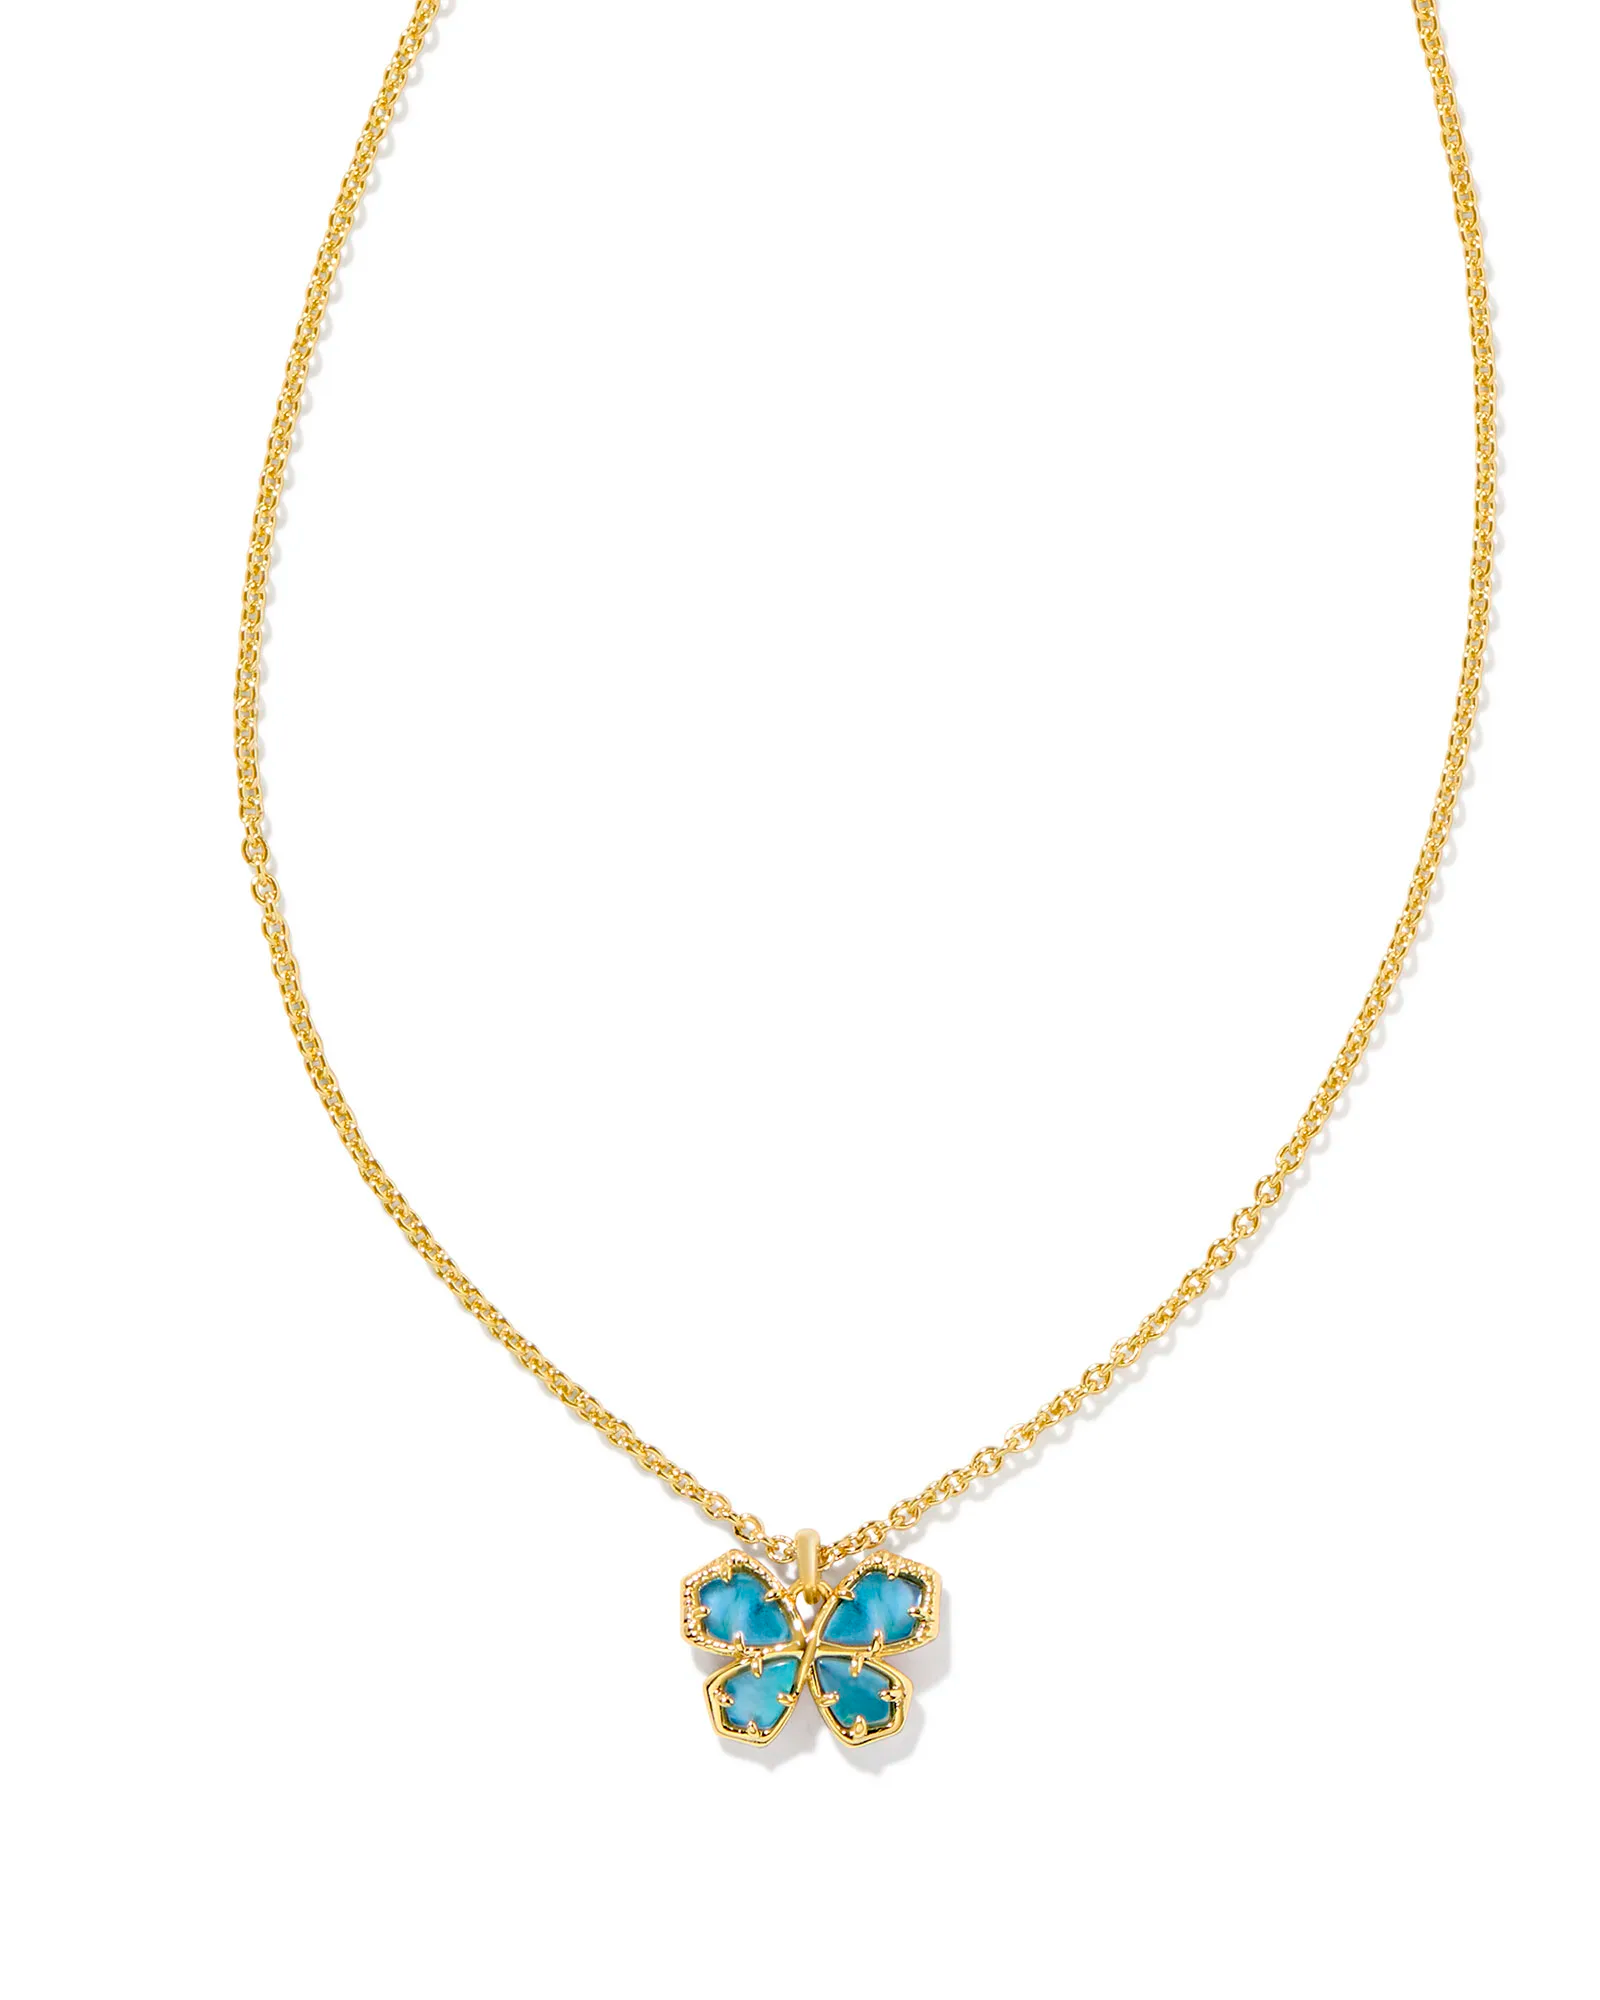 KENDRA SCOTT MAE BUTTERFLY PENDANT NECKLACE IN GOLD INDIGO WATERCOLOR ILLUSION